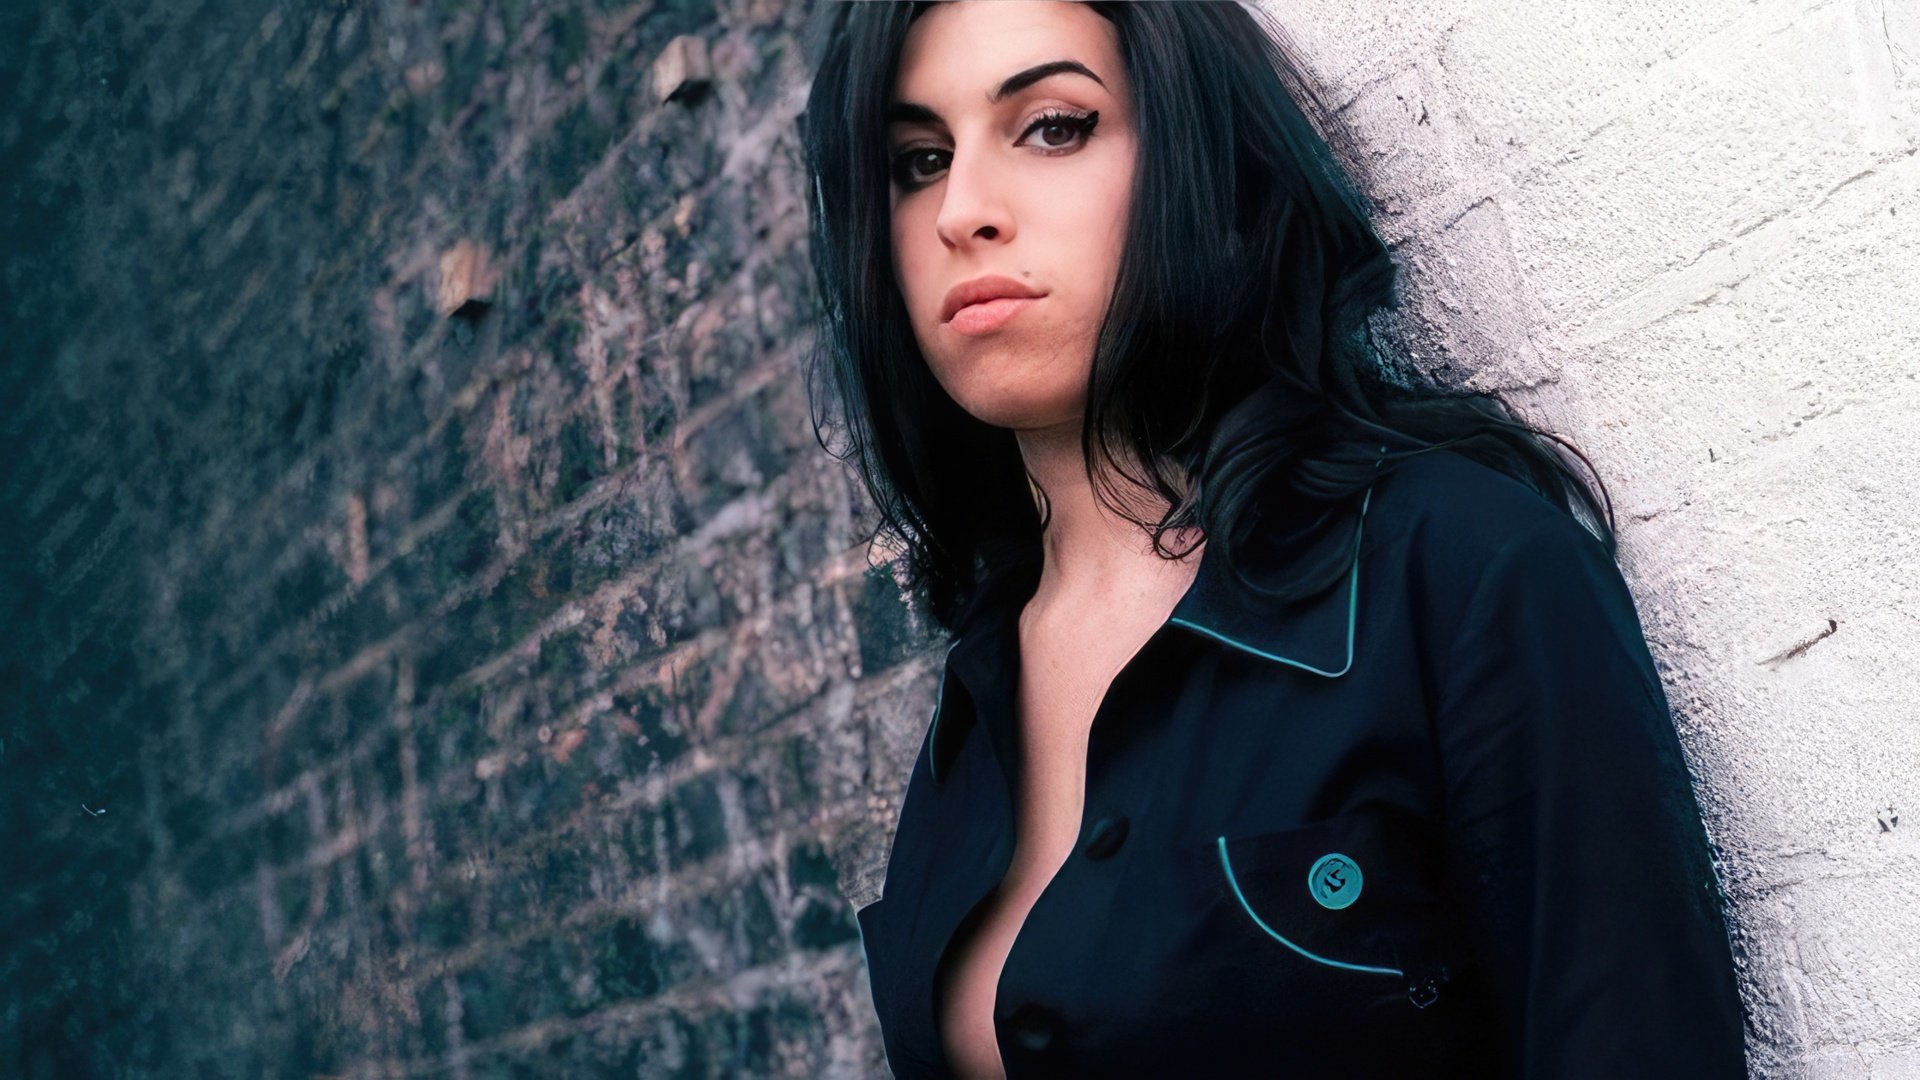 At the beginning of 2008, Amy Winehouse took rehabilitation course